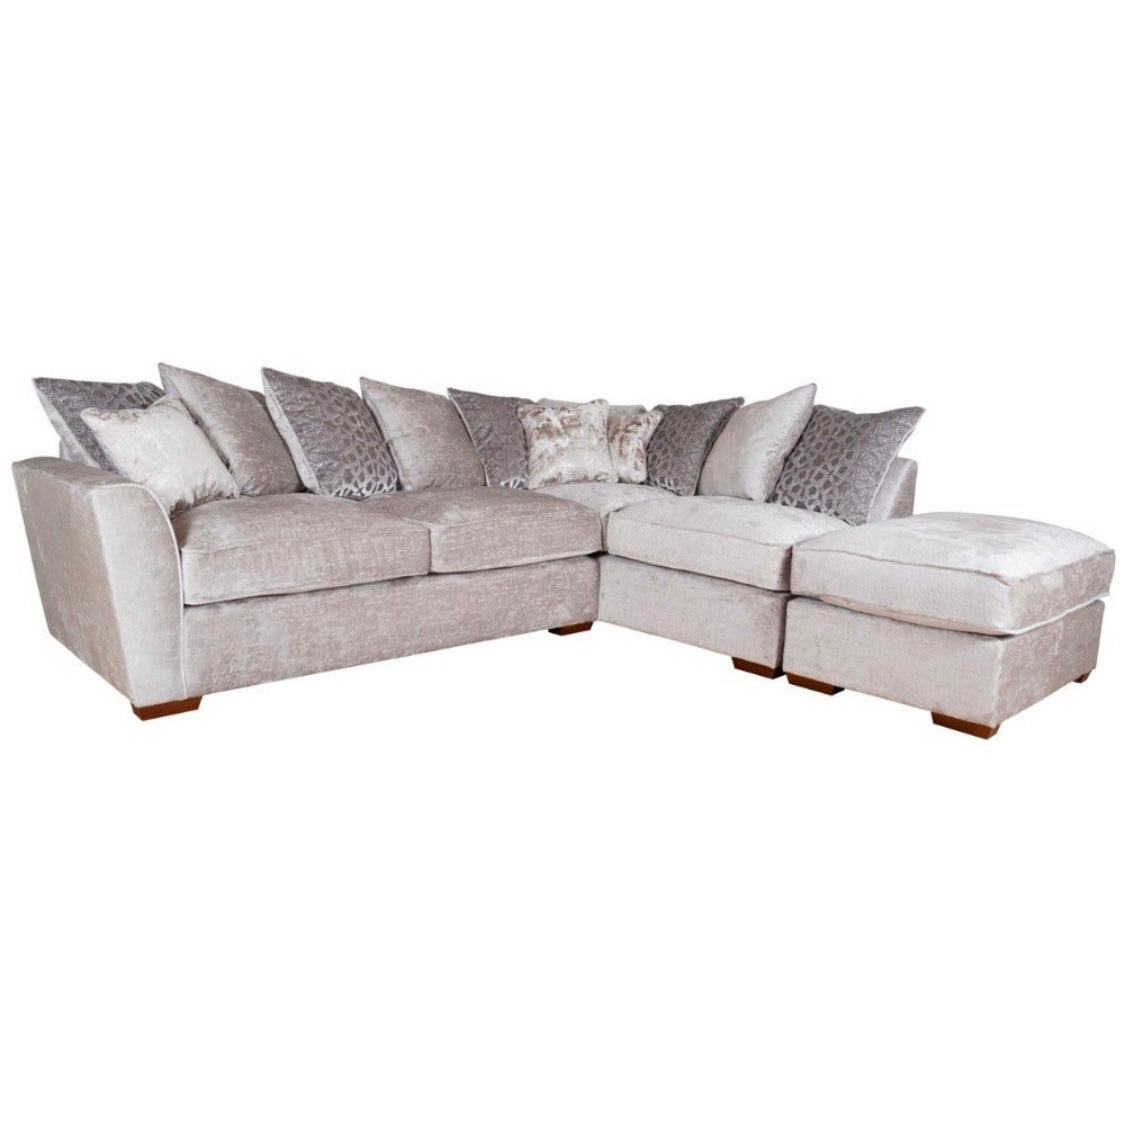 Fantasia Silver Scatter Cushion Corner Sofa With Footstool